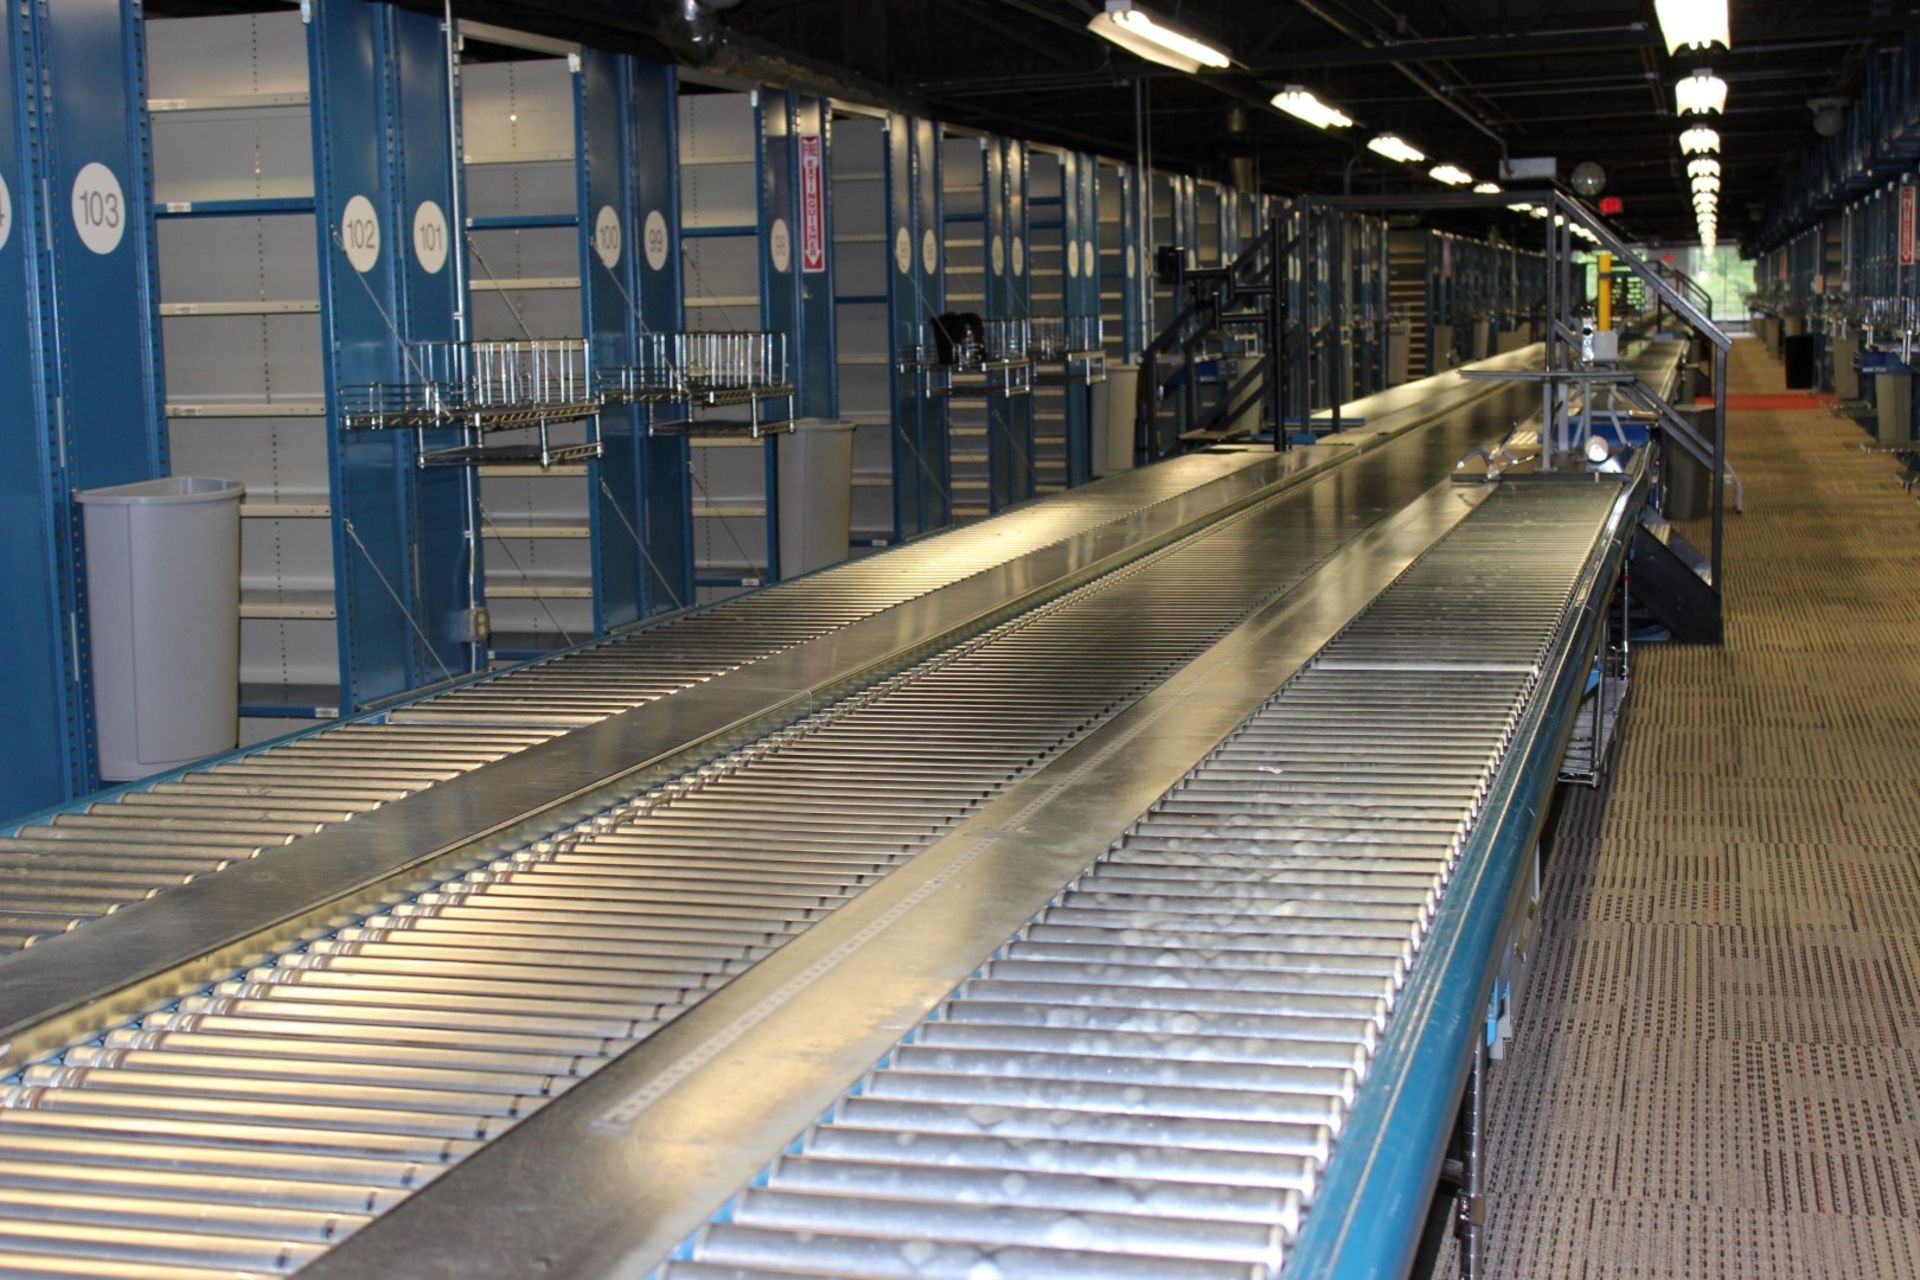 30 FT LONG 24"W RAPISTAN POWERED CONVEYOR WITH 18"W GRAVITY CONVEYOR LINES BOTH SIDES